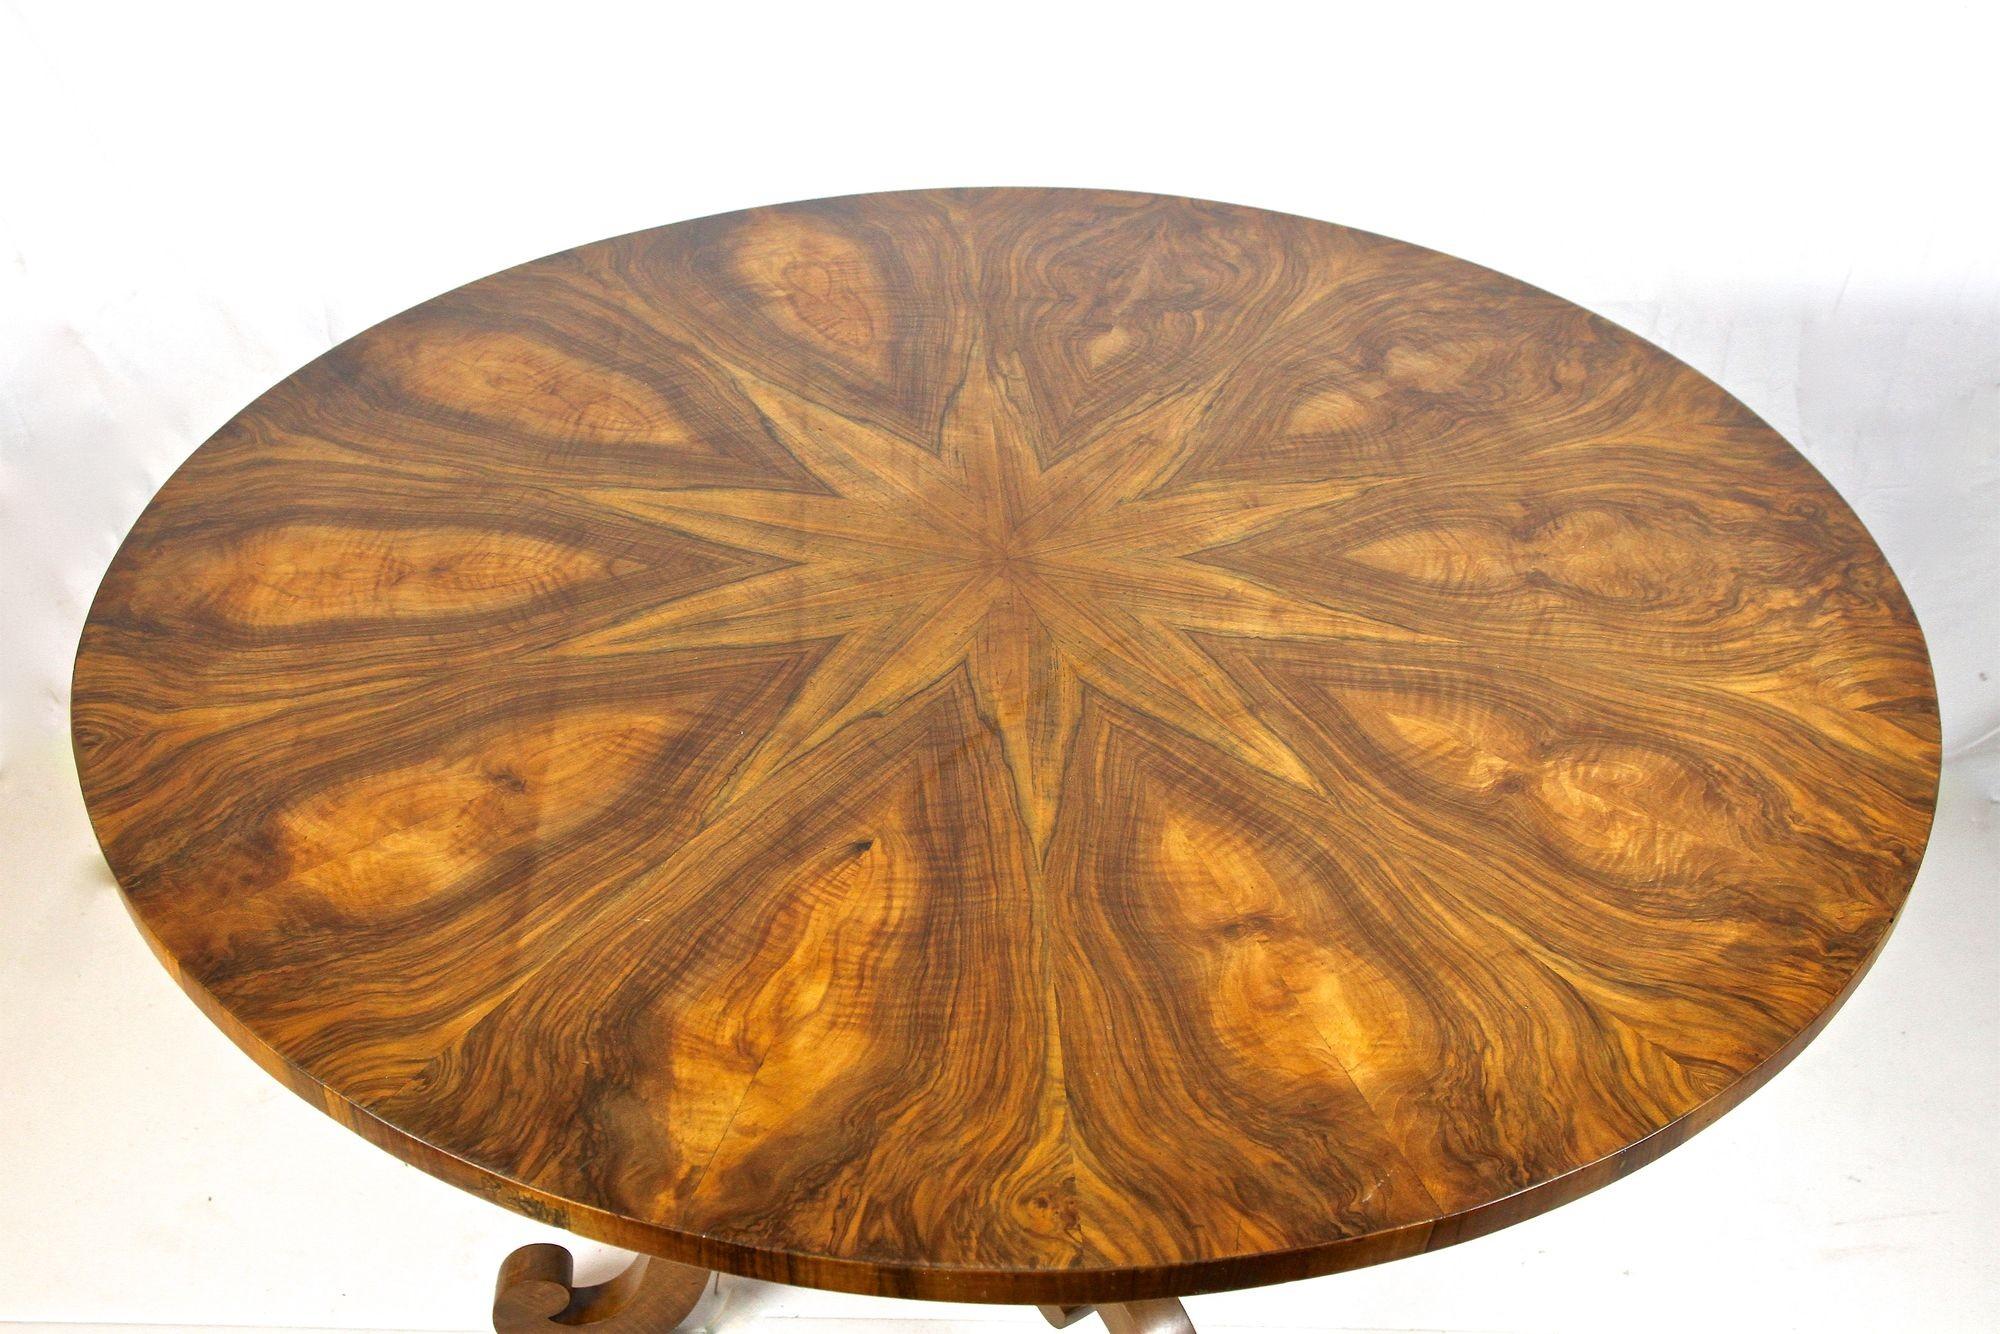 Striking round early 19th century Biedermeier dining- or center table coming from the famous period in Vienna/ Austria. Elaborately handcrafted around around 1830, this gorgeous round antique Biedermeier table impresses with an absolute fantastic